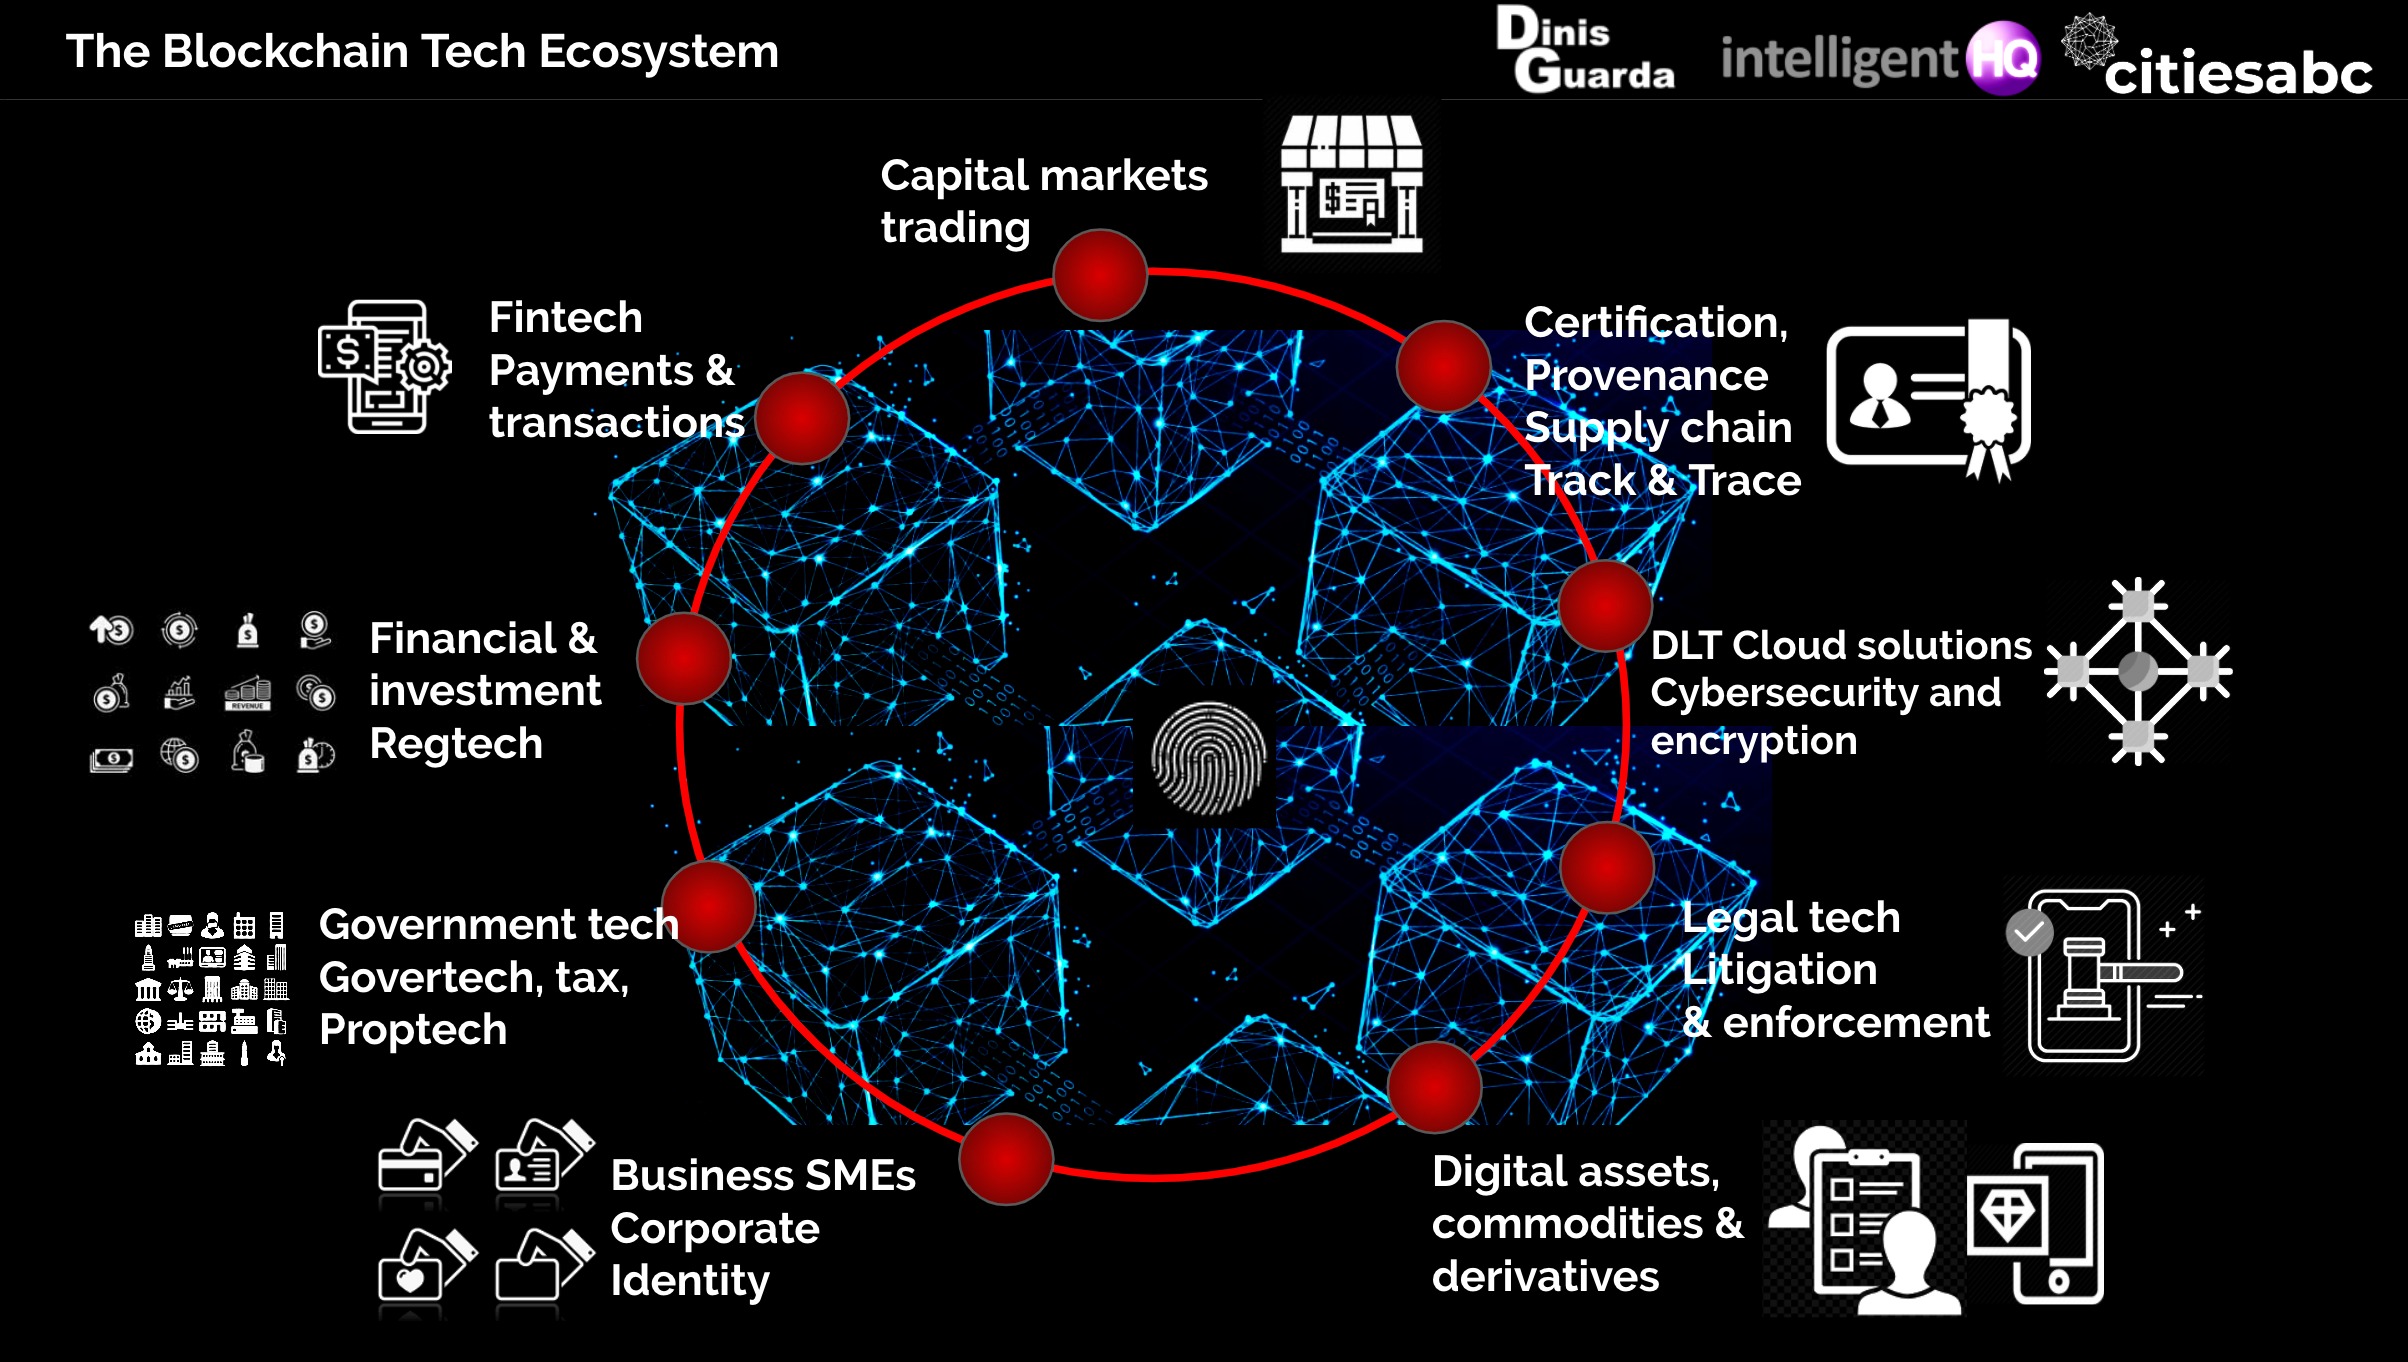 The Blockchain Tech Ecosystem and Features